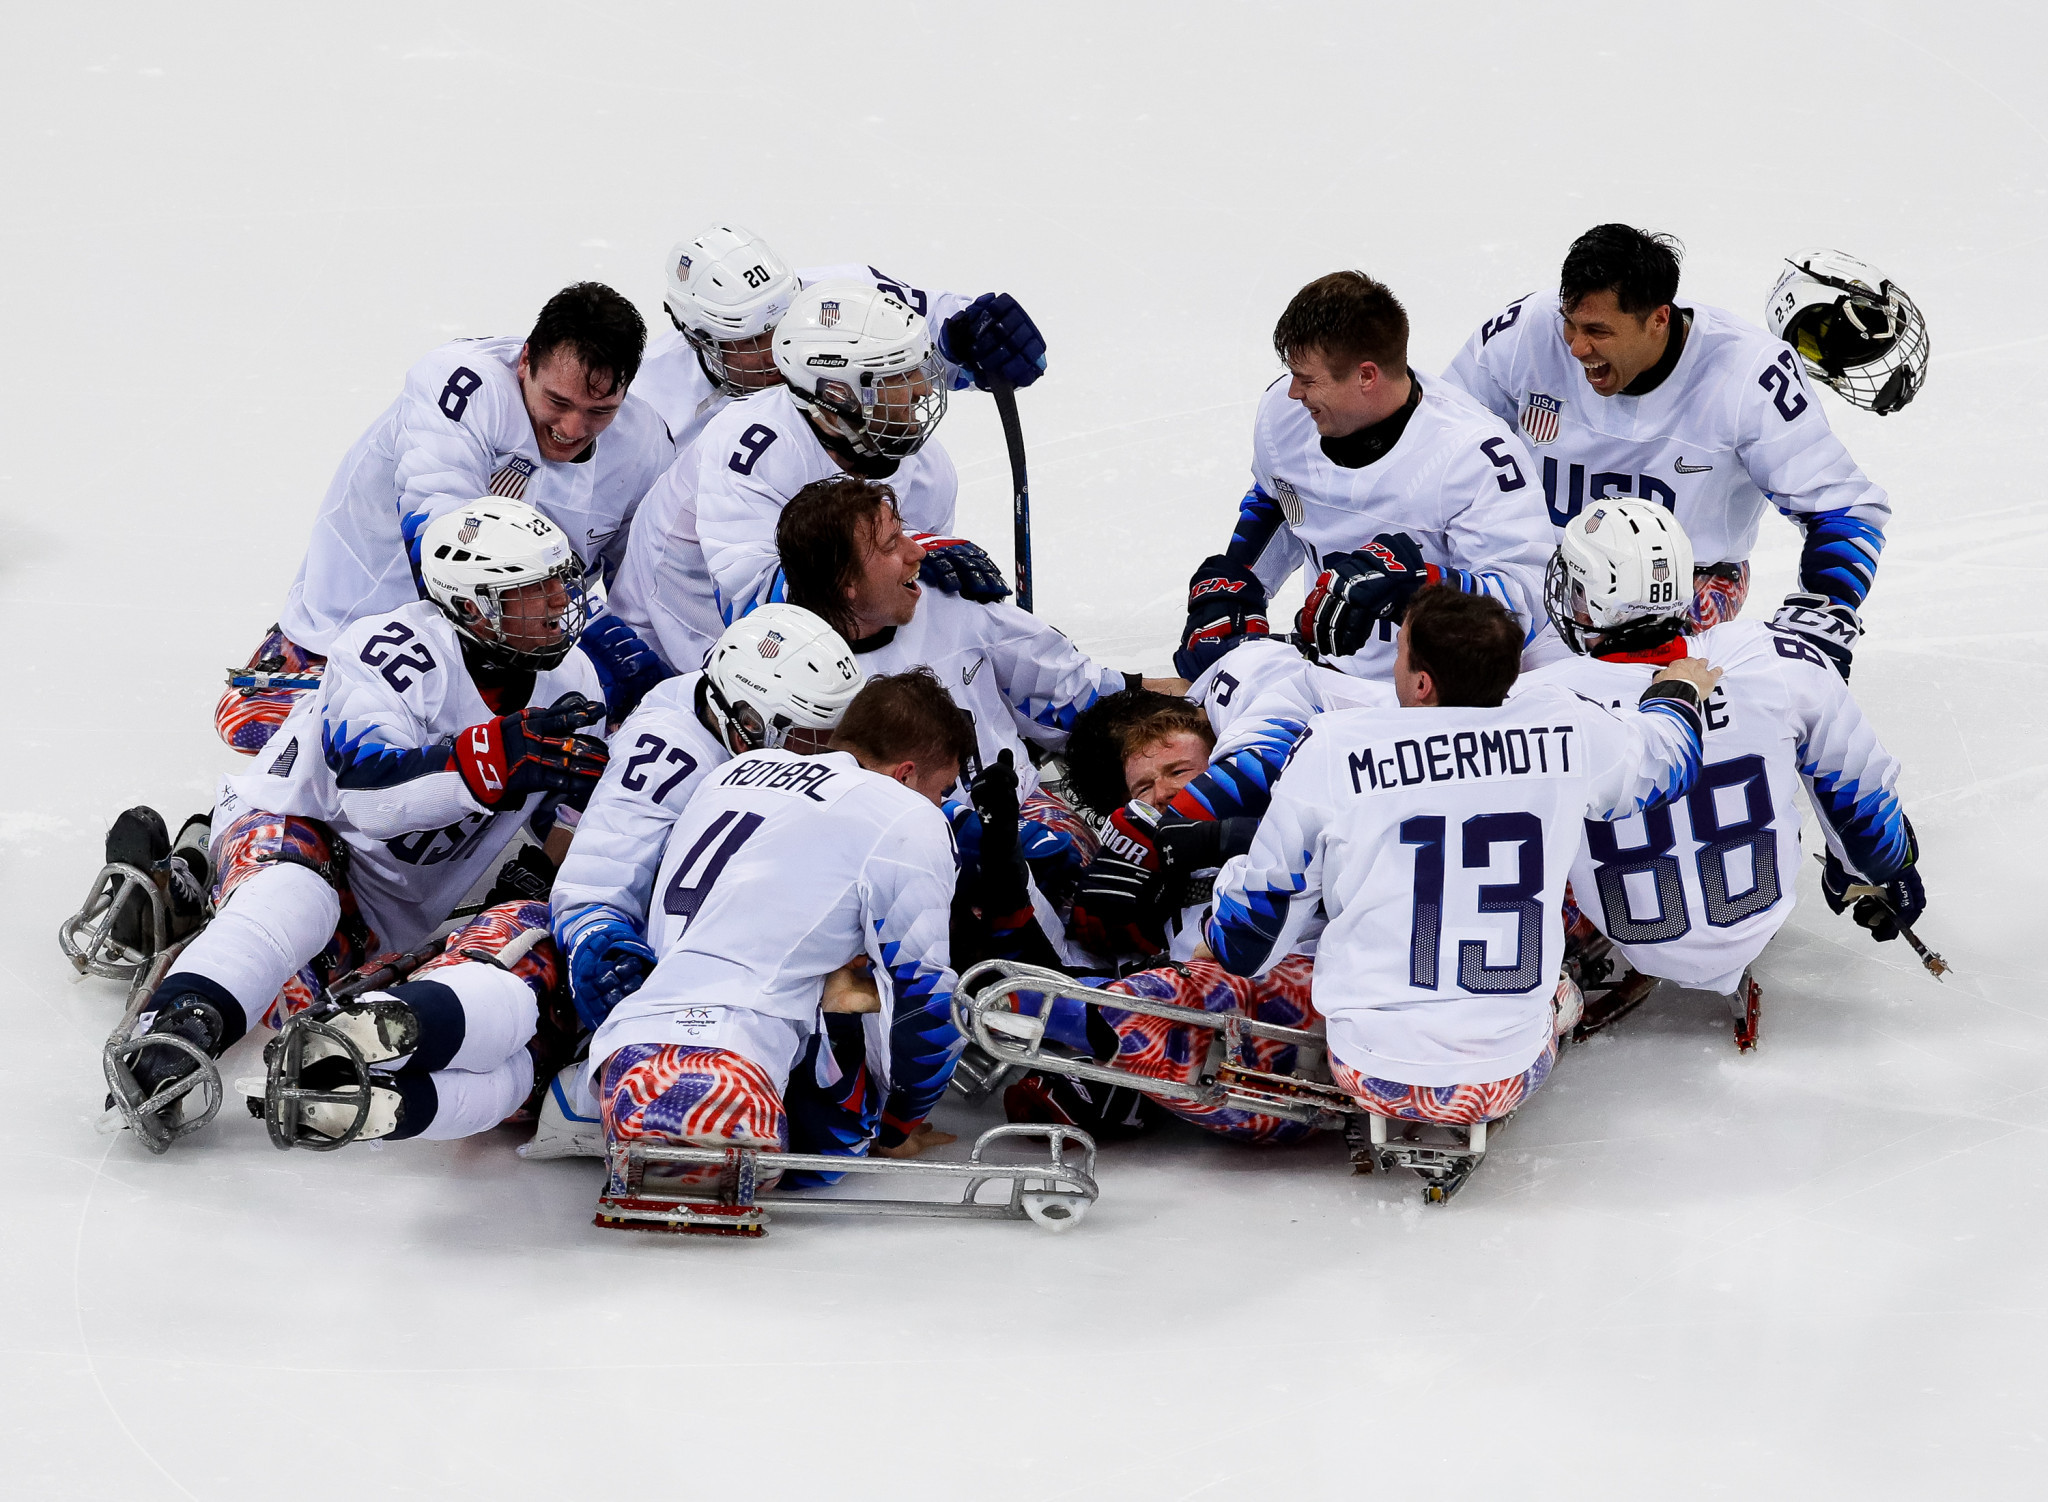 United States beat Canada to Para-ice hockey gold in dramatic fashion on final day of Pyeongchang 2018